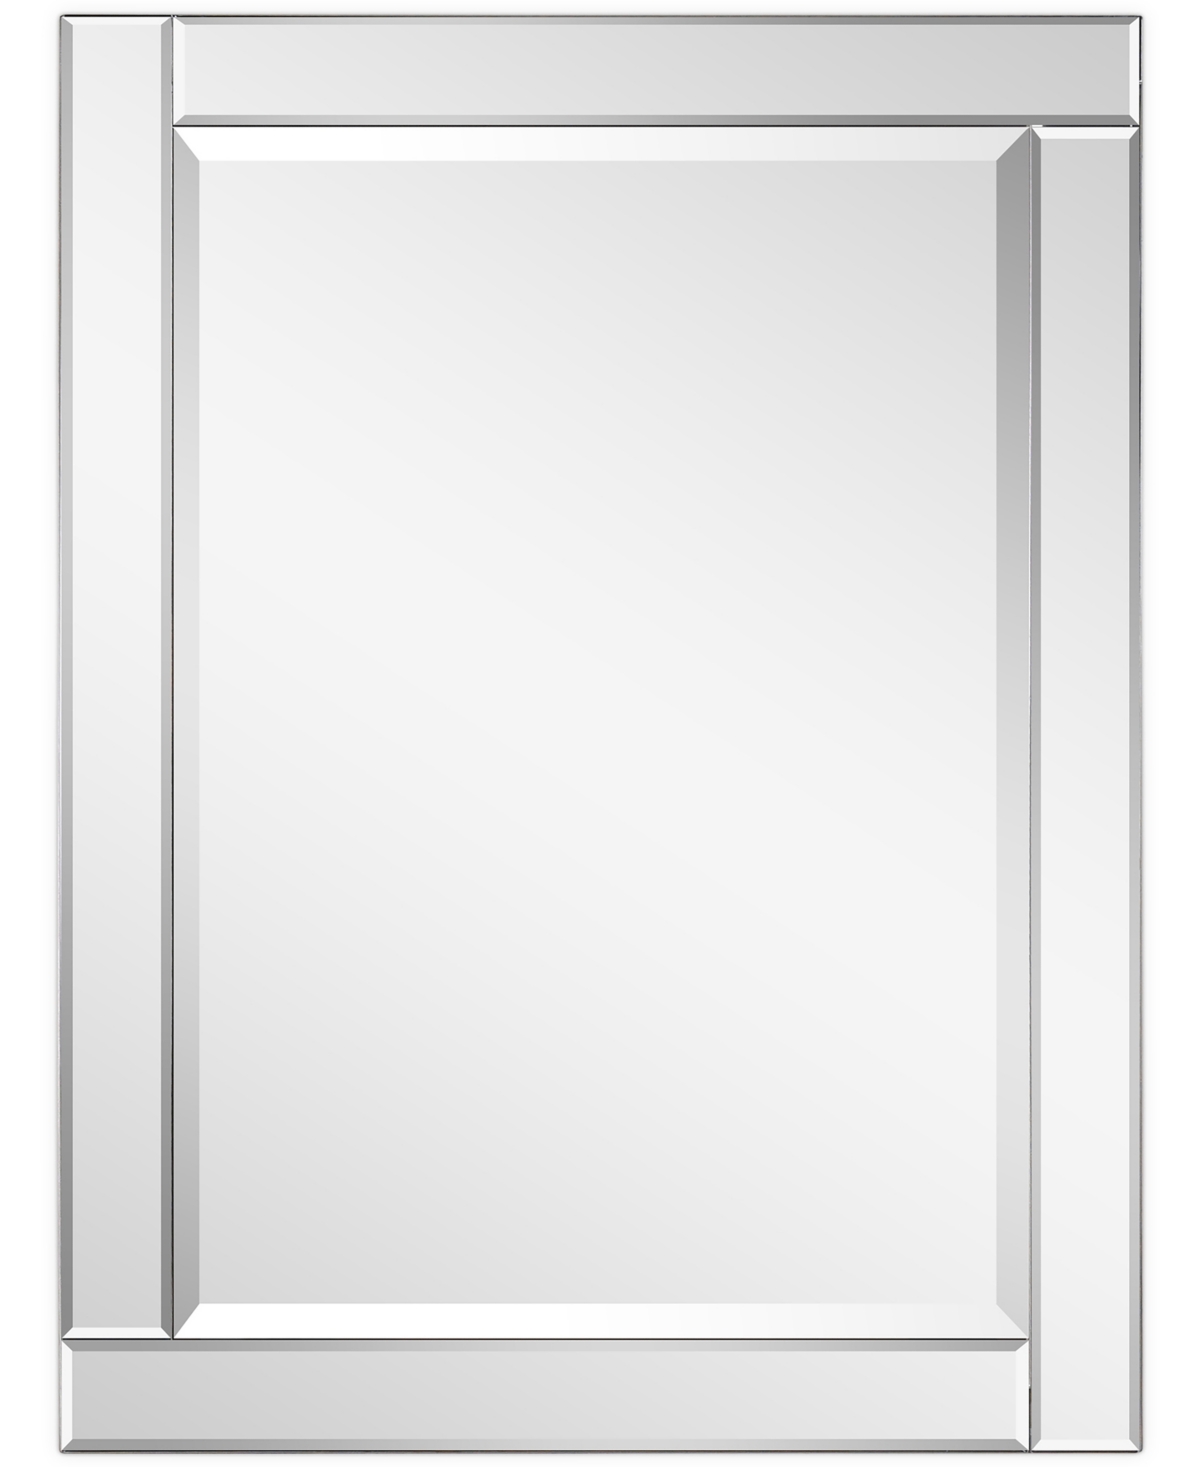 Moderno Beveled Rectangle Wall Mirror, 40" x 30" x 1.18" - Clear